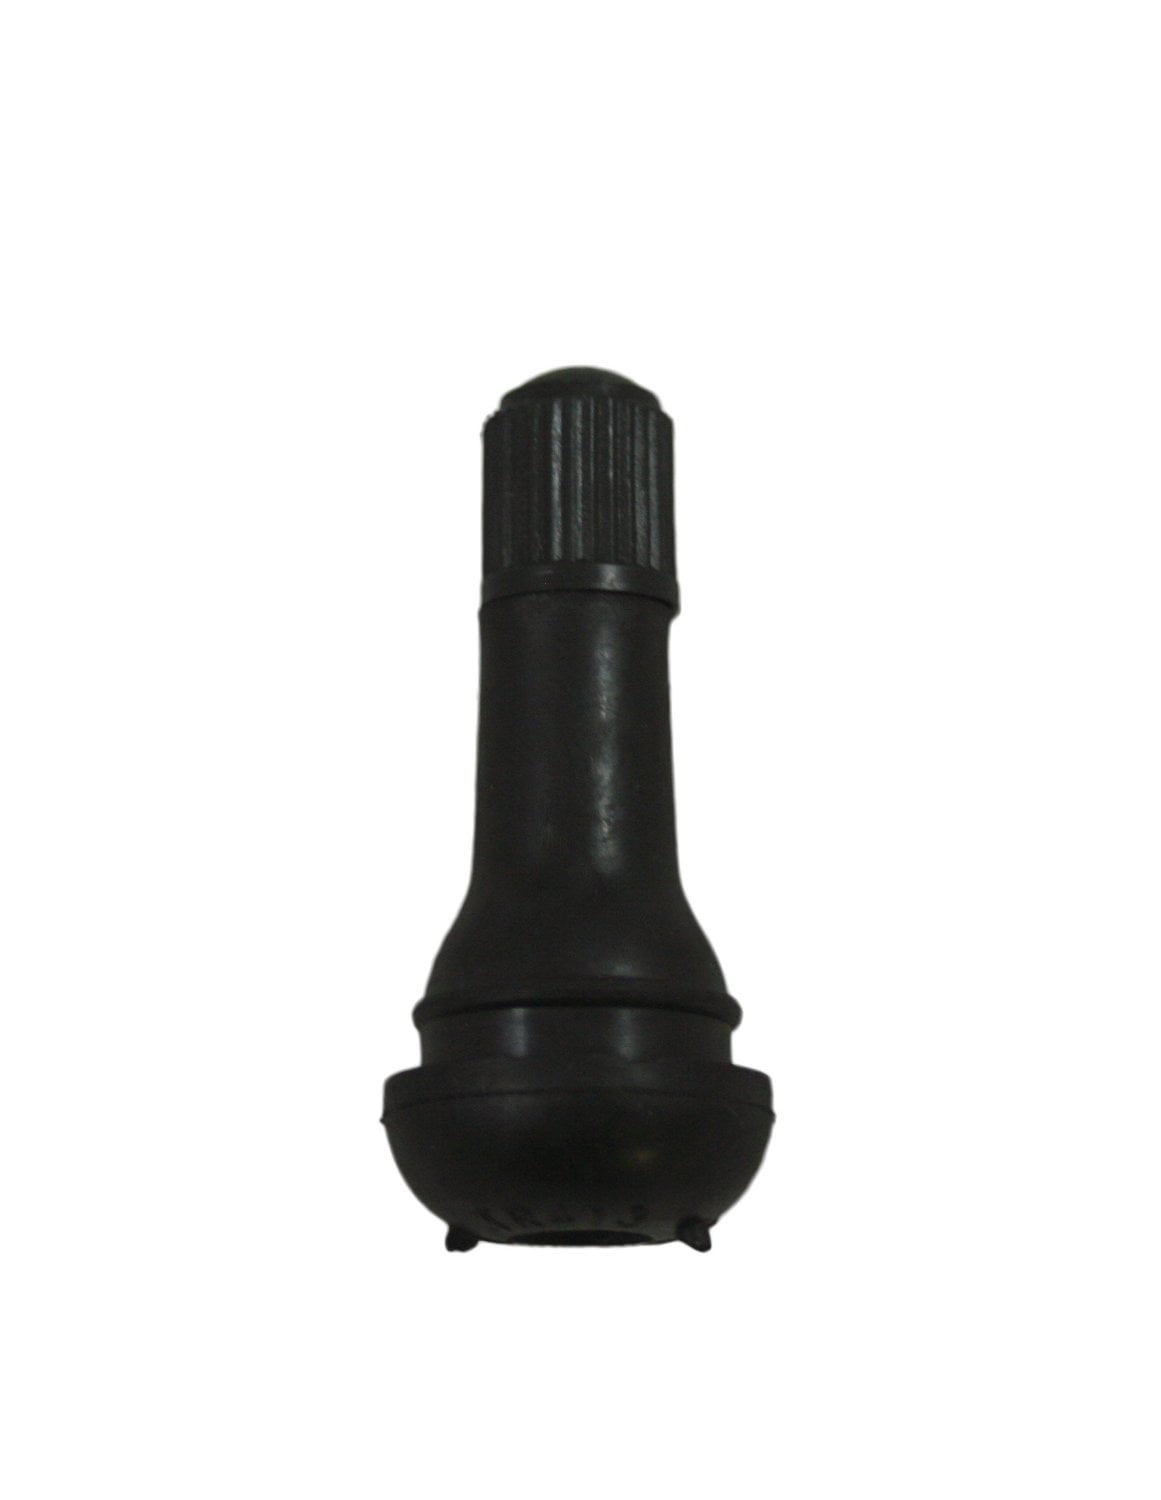 Pull Through Snap In RockTrix Black Rubber Valve Stems Pack of 12 TR413 - Extended 2 inch Length 